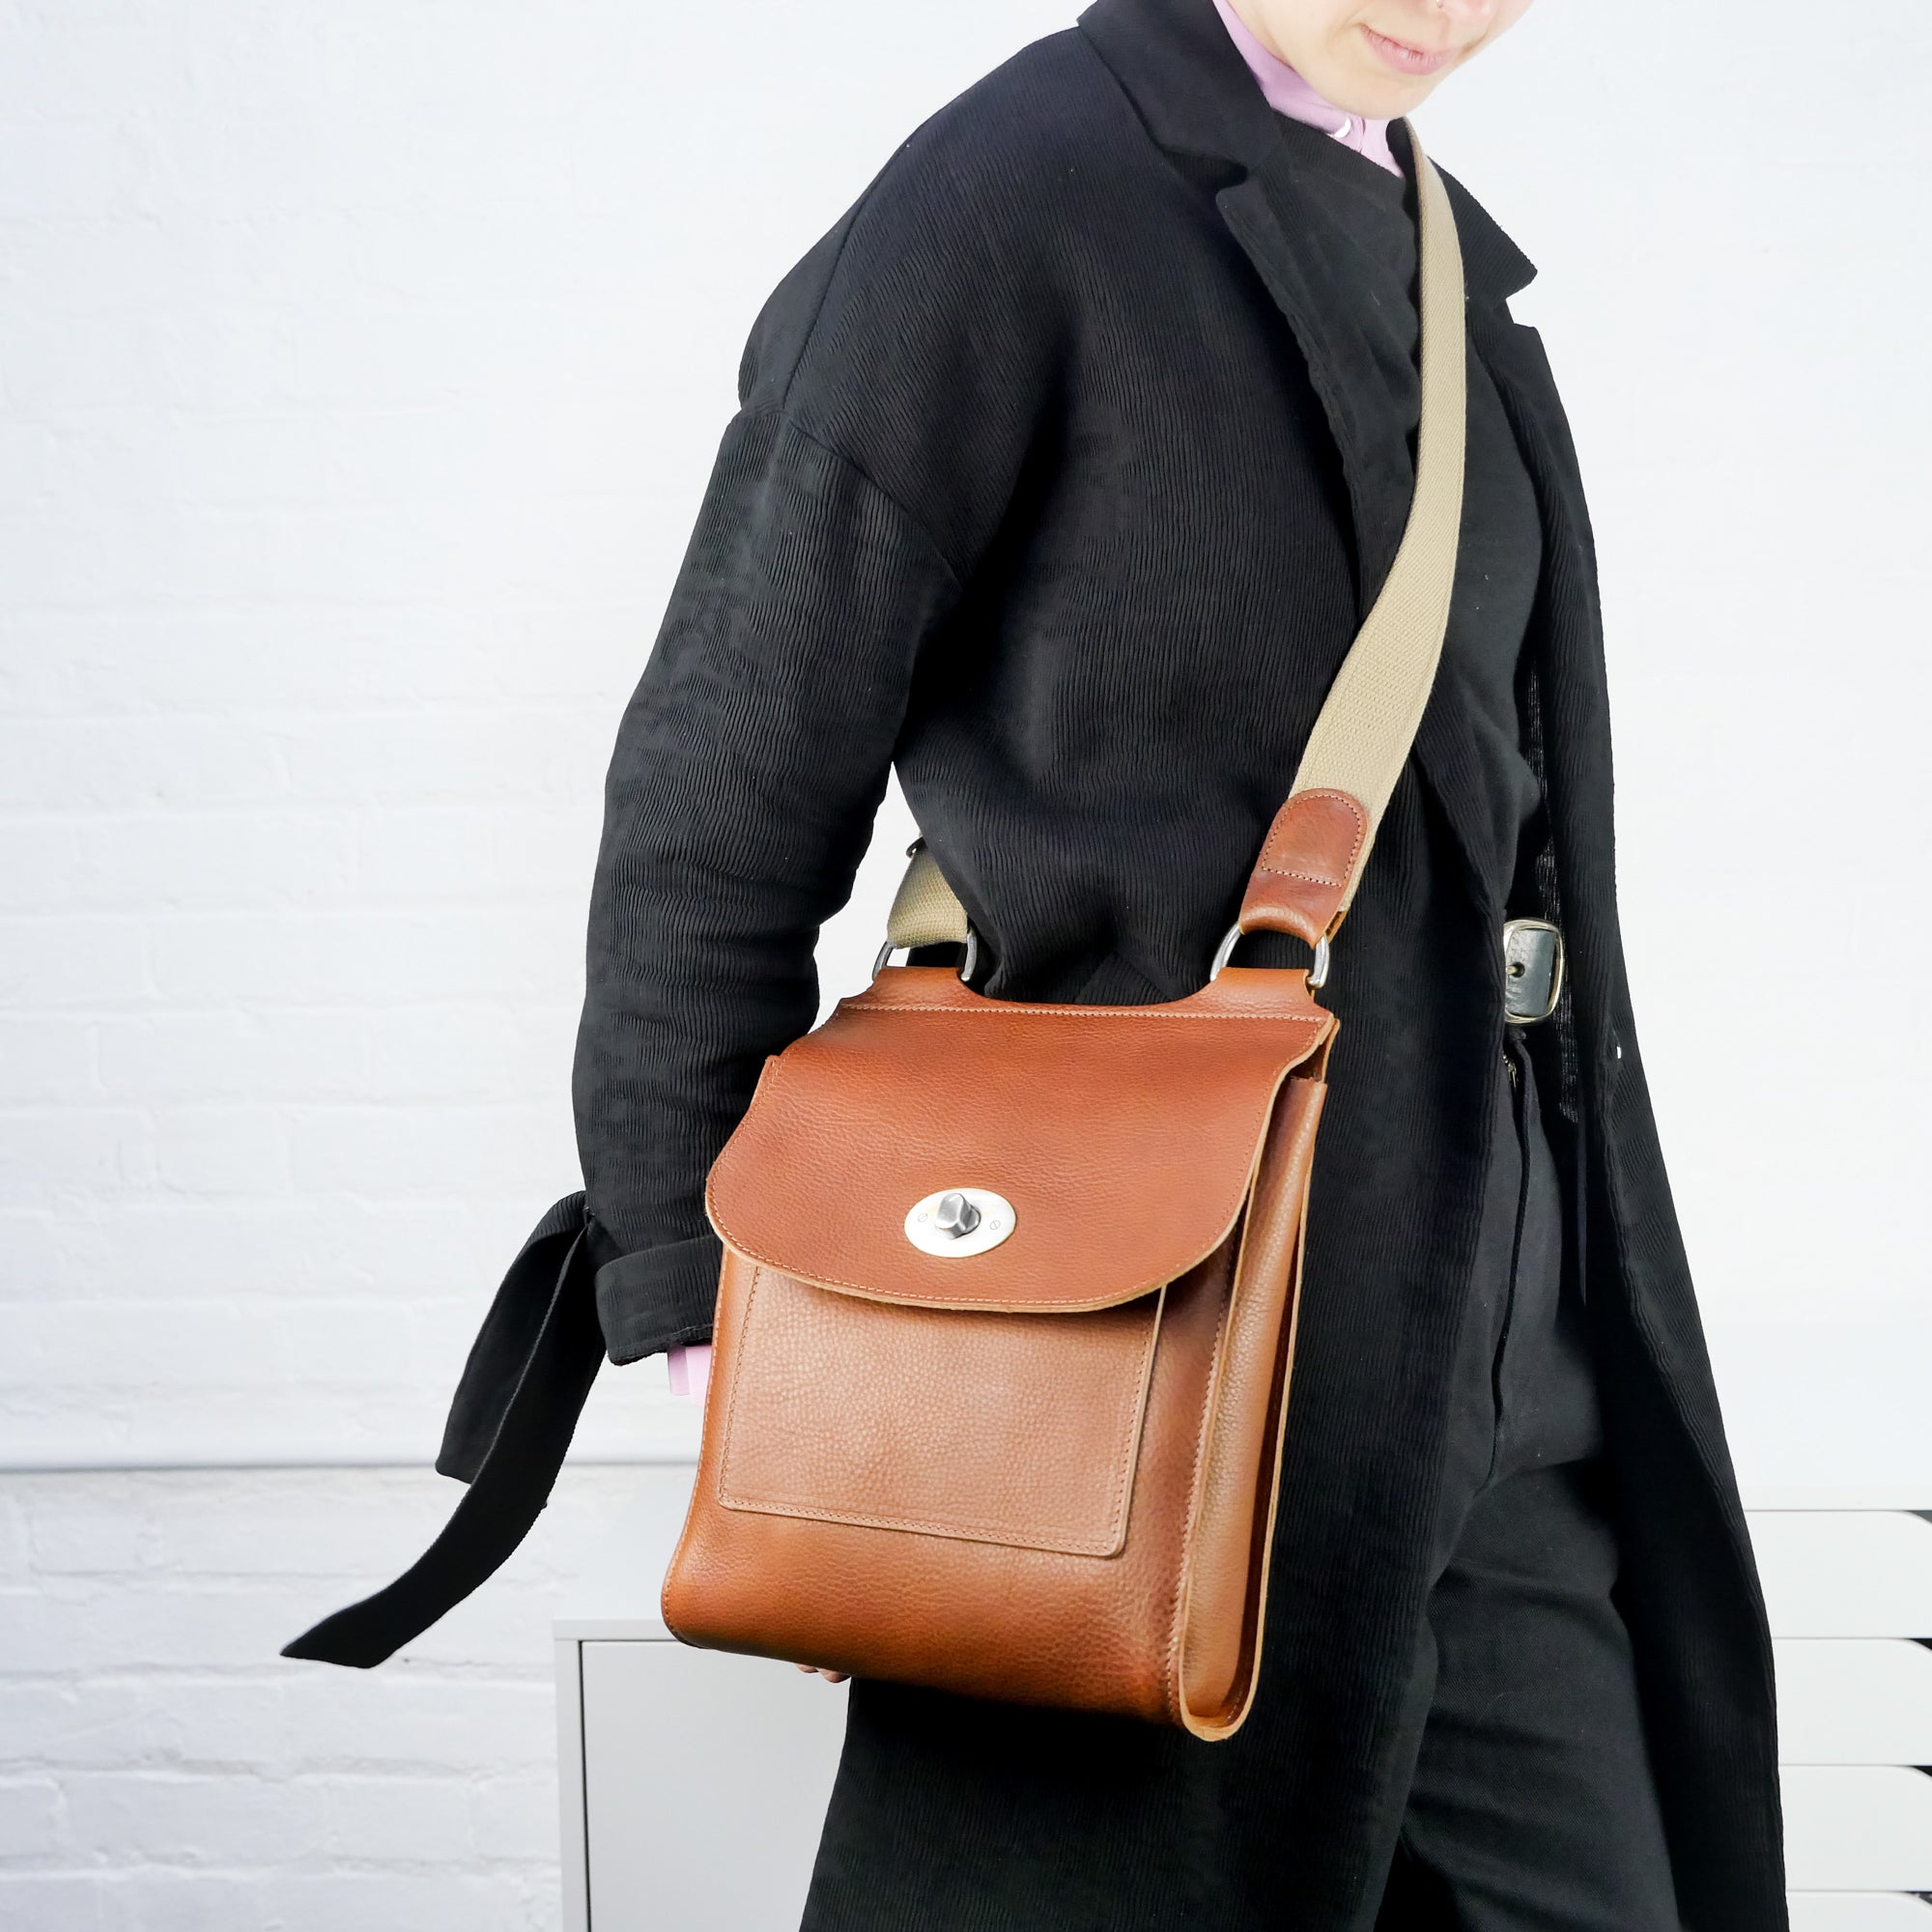 The Medium Remmy Bag: Leather Shoulder Bag in Tan | The Horse